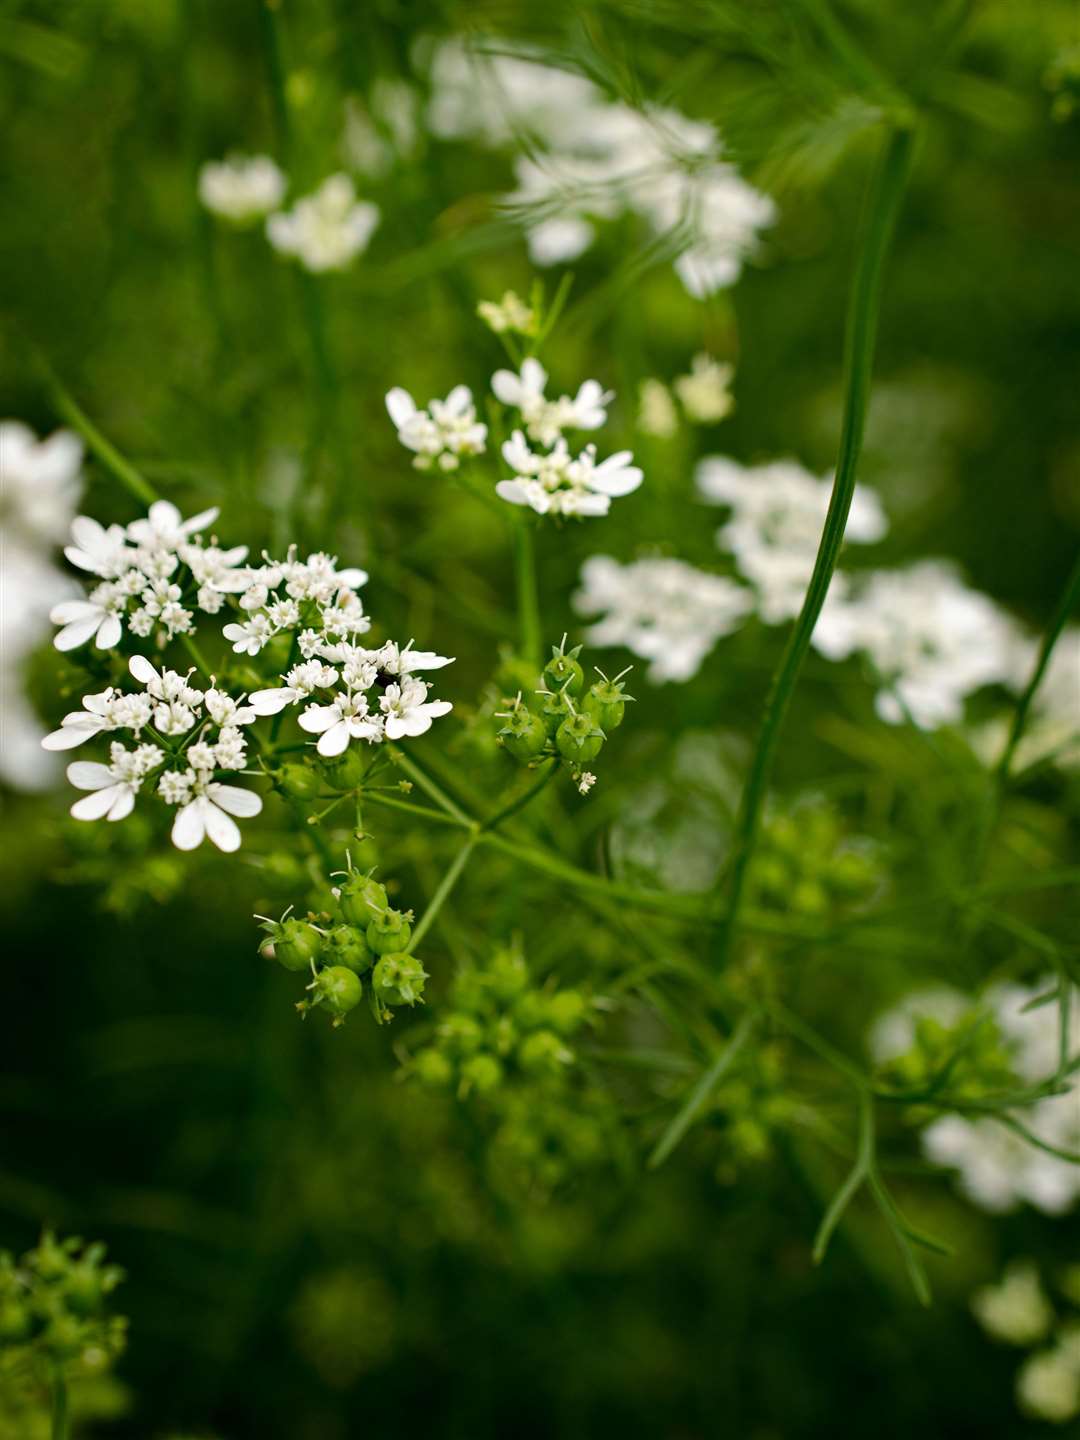 flowers and coriander seeds are outdoors